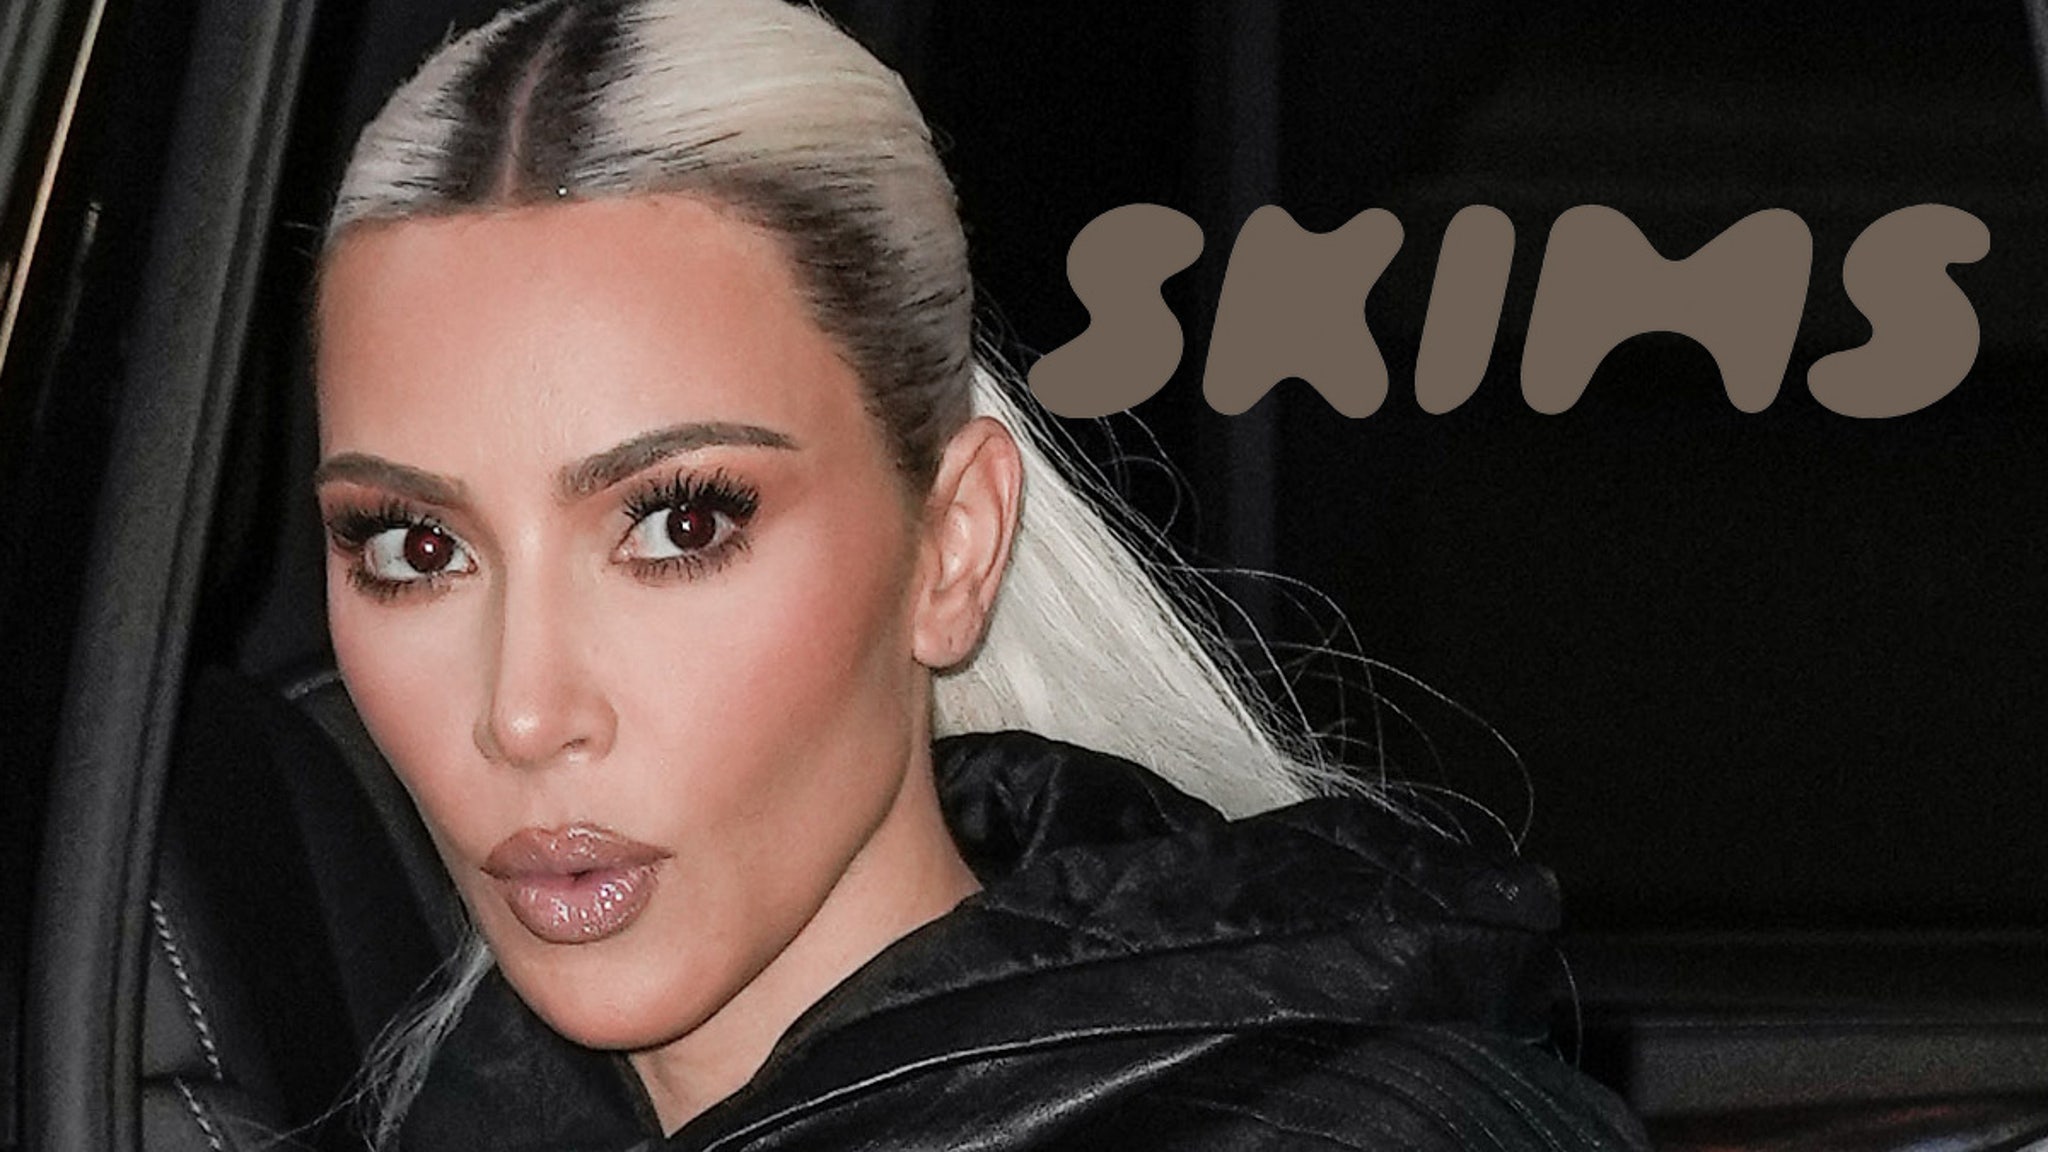 Kim Kardashian's SKIMS brand says suing woman bought duct tape from Amazon, not SKIMS